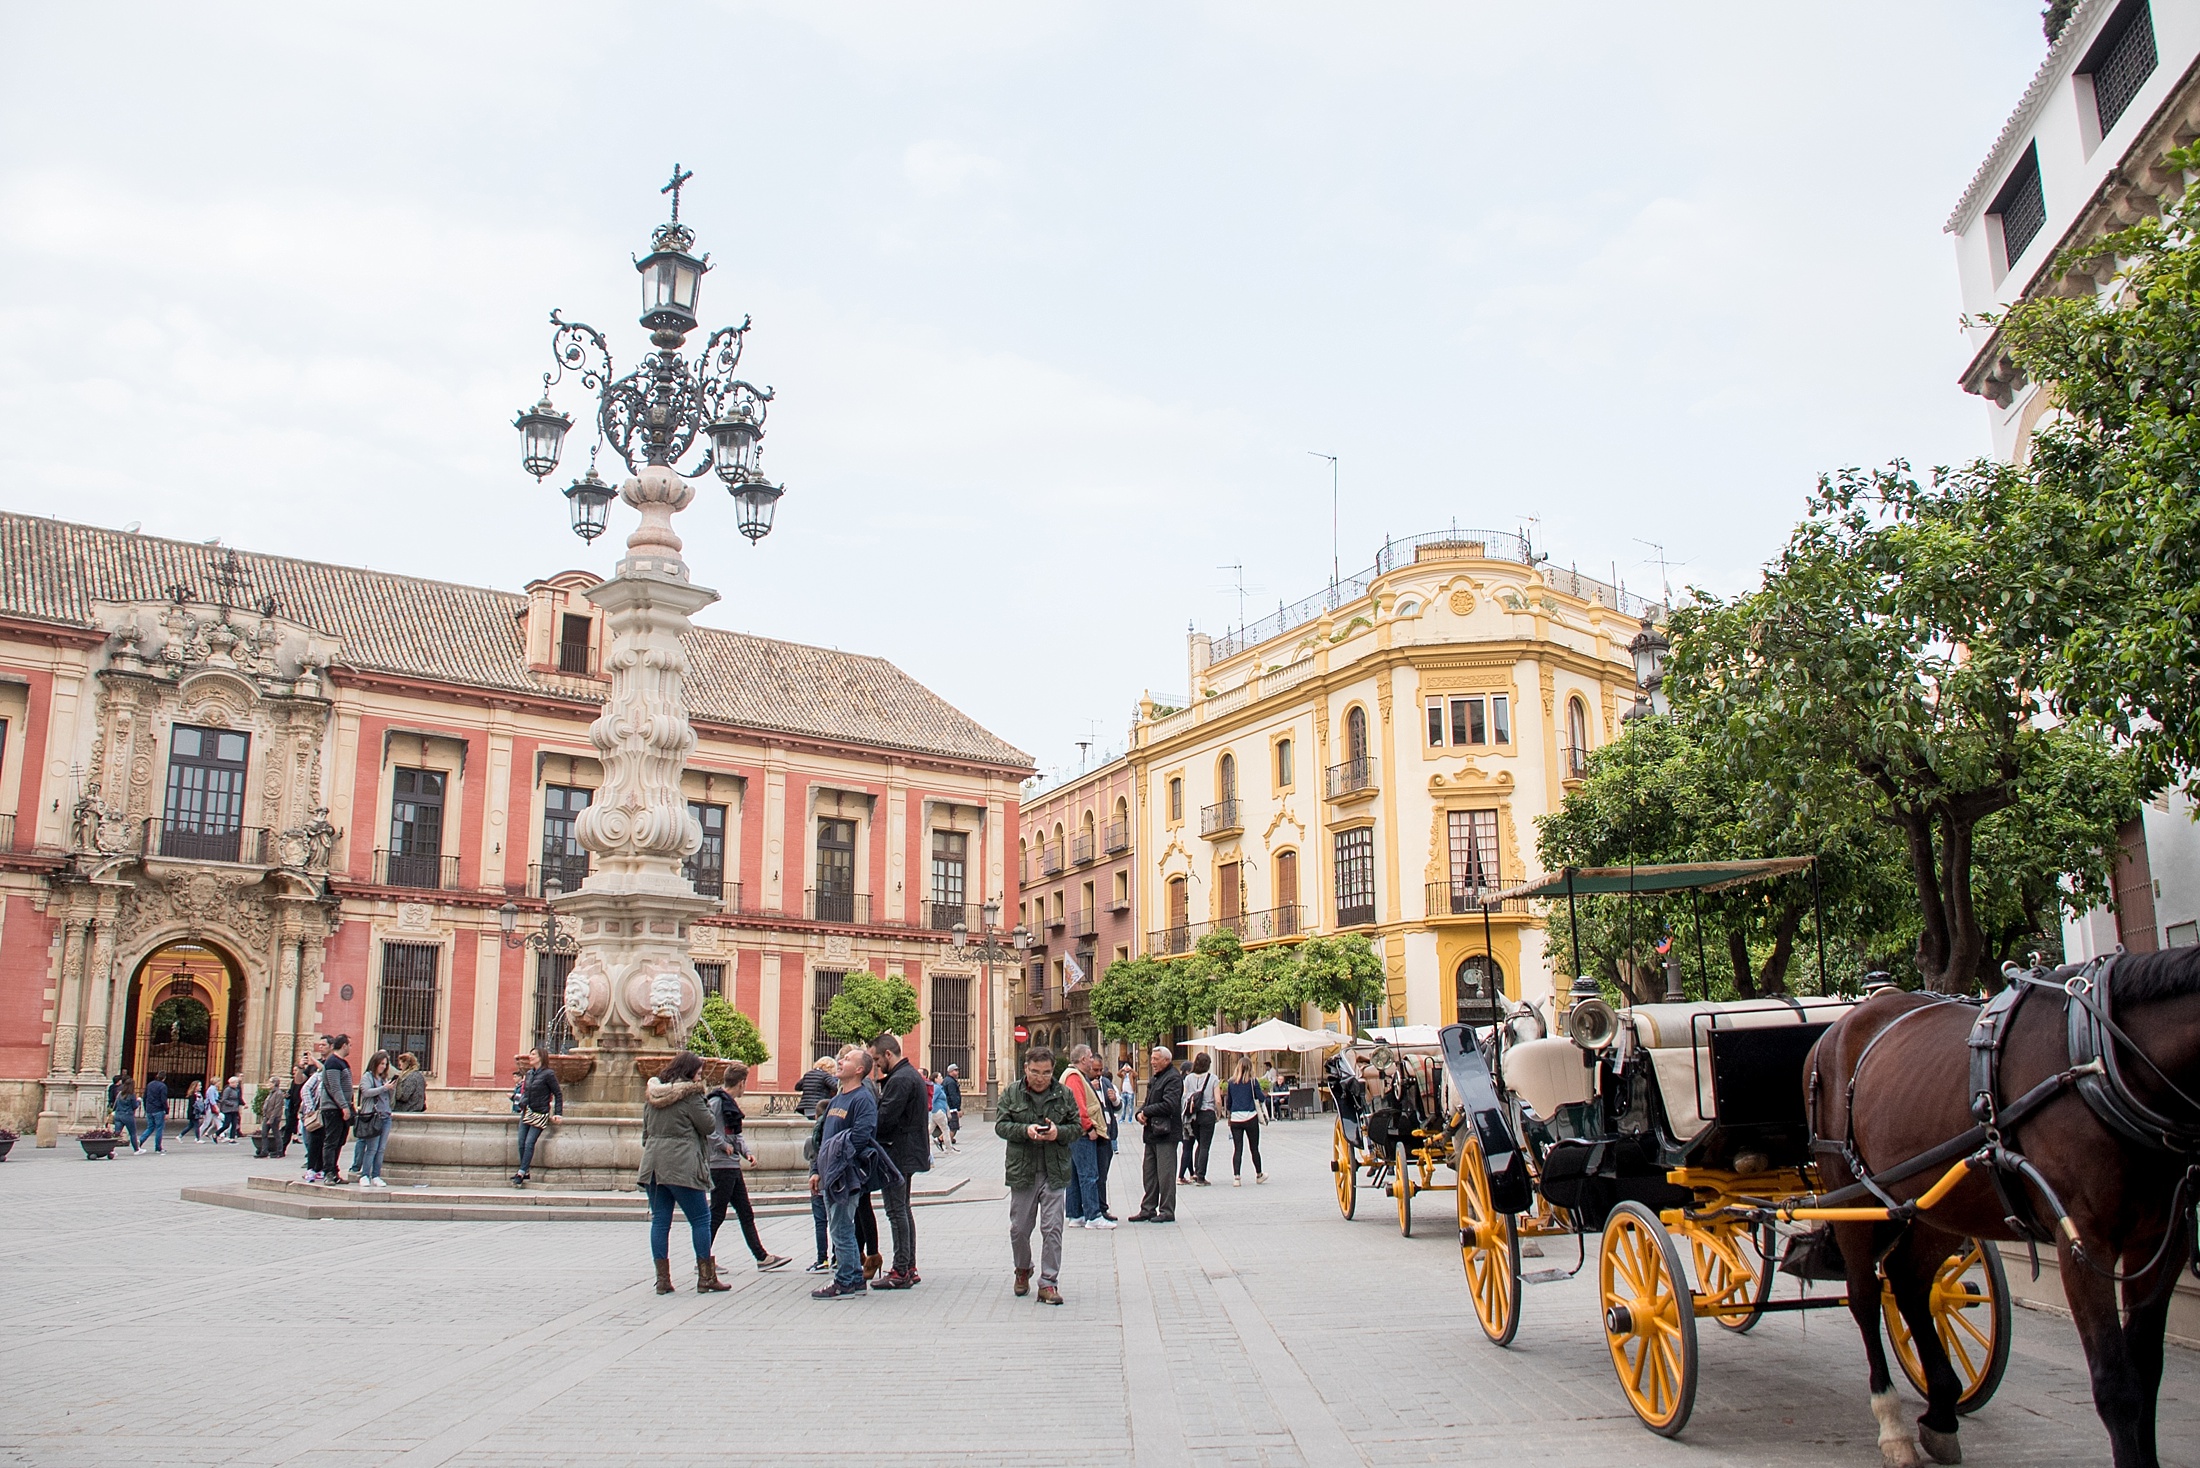 Seville or Madrid: Which City Should You Visit? Photos and pros and cons by Mikkel Paige of Sometimes Home for Department of Wandering travel site.